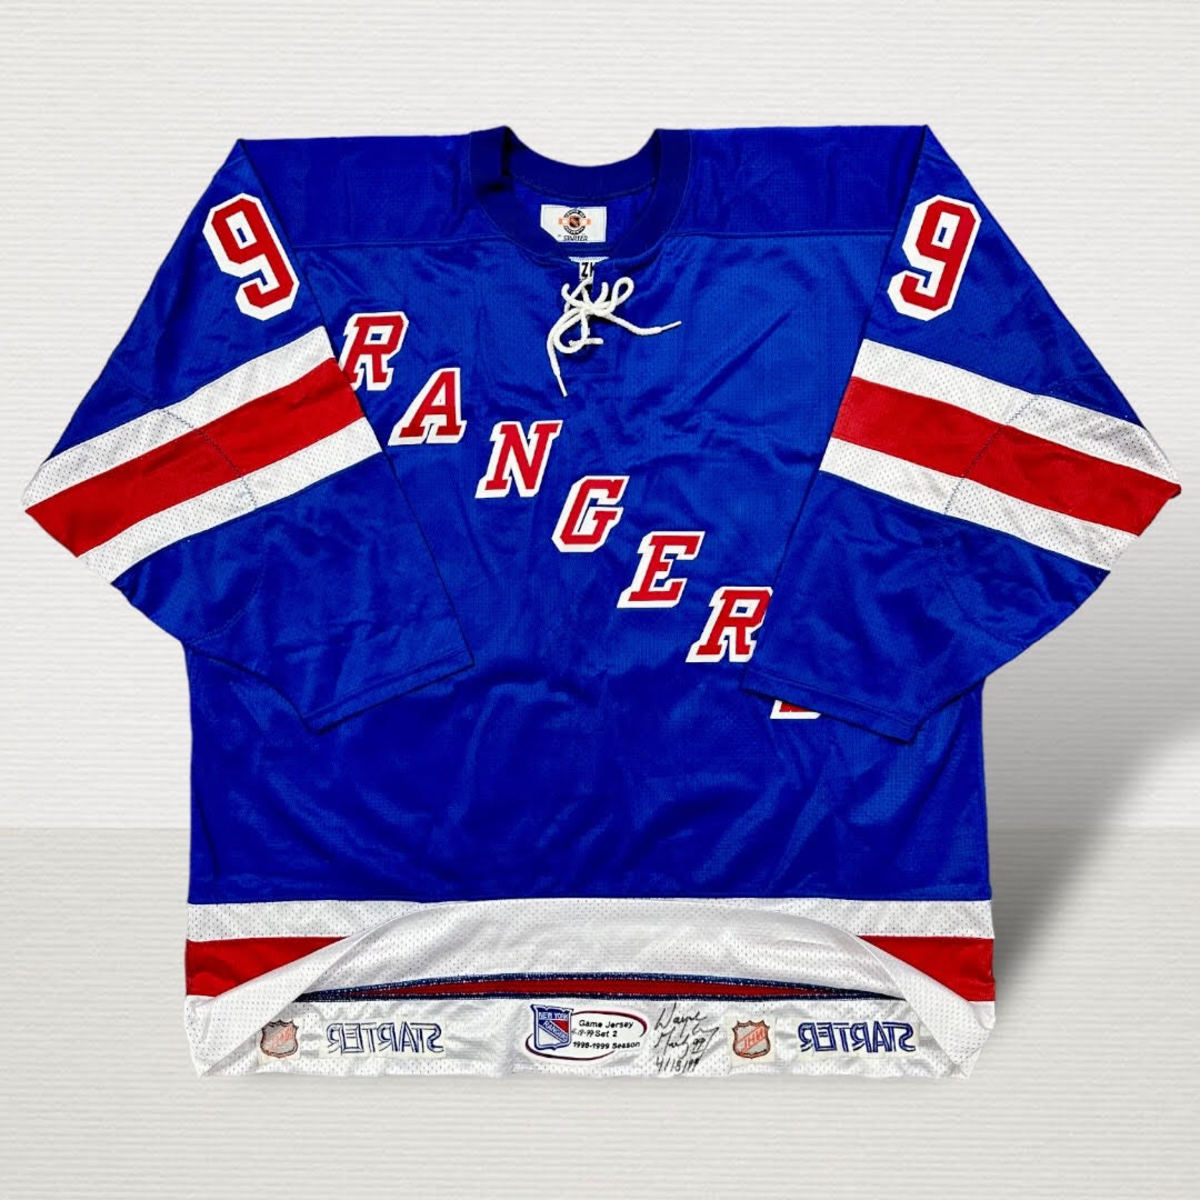 Wayne Gretzky's final NHL game jersey sells for $715K at Grey Flannel -  Sports Collectors Digest